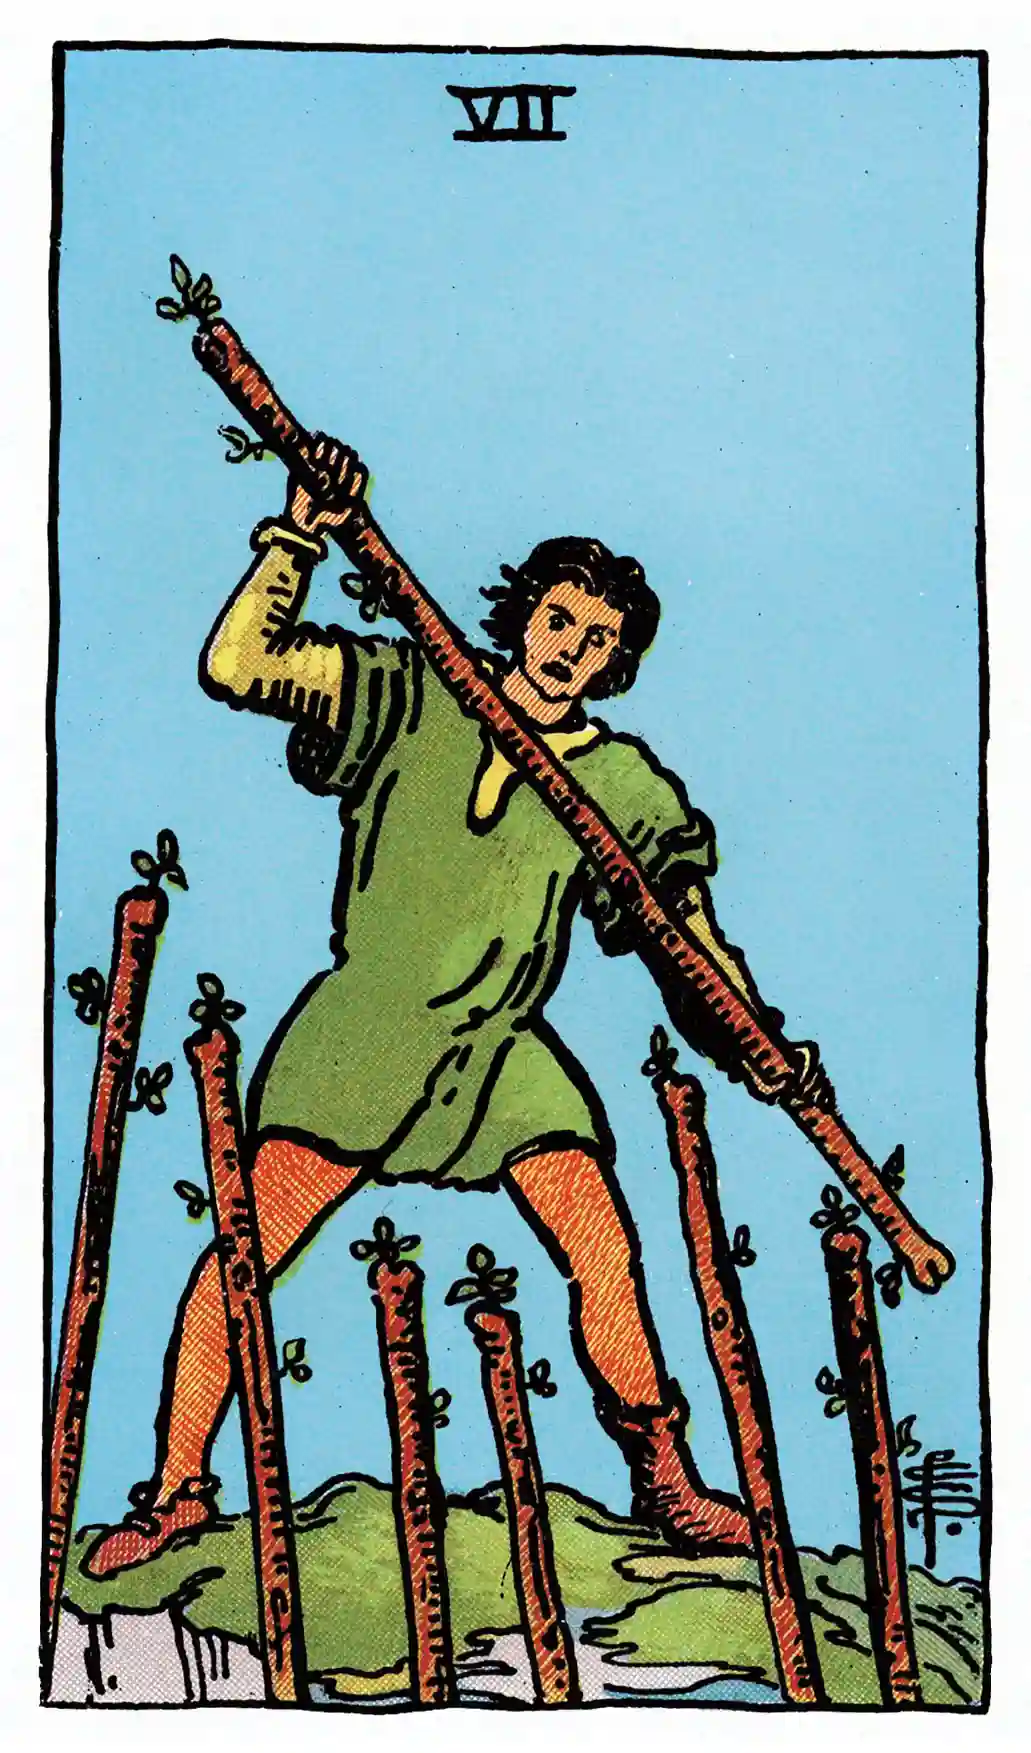 28 Seven of Wands (Upright)